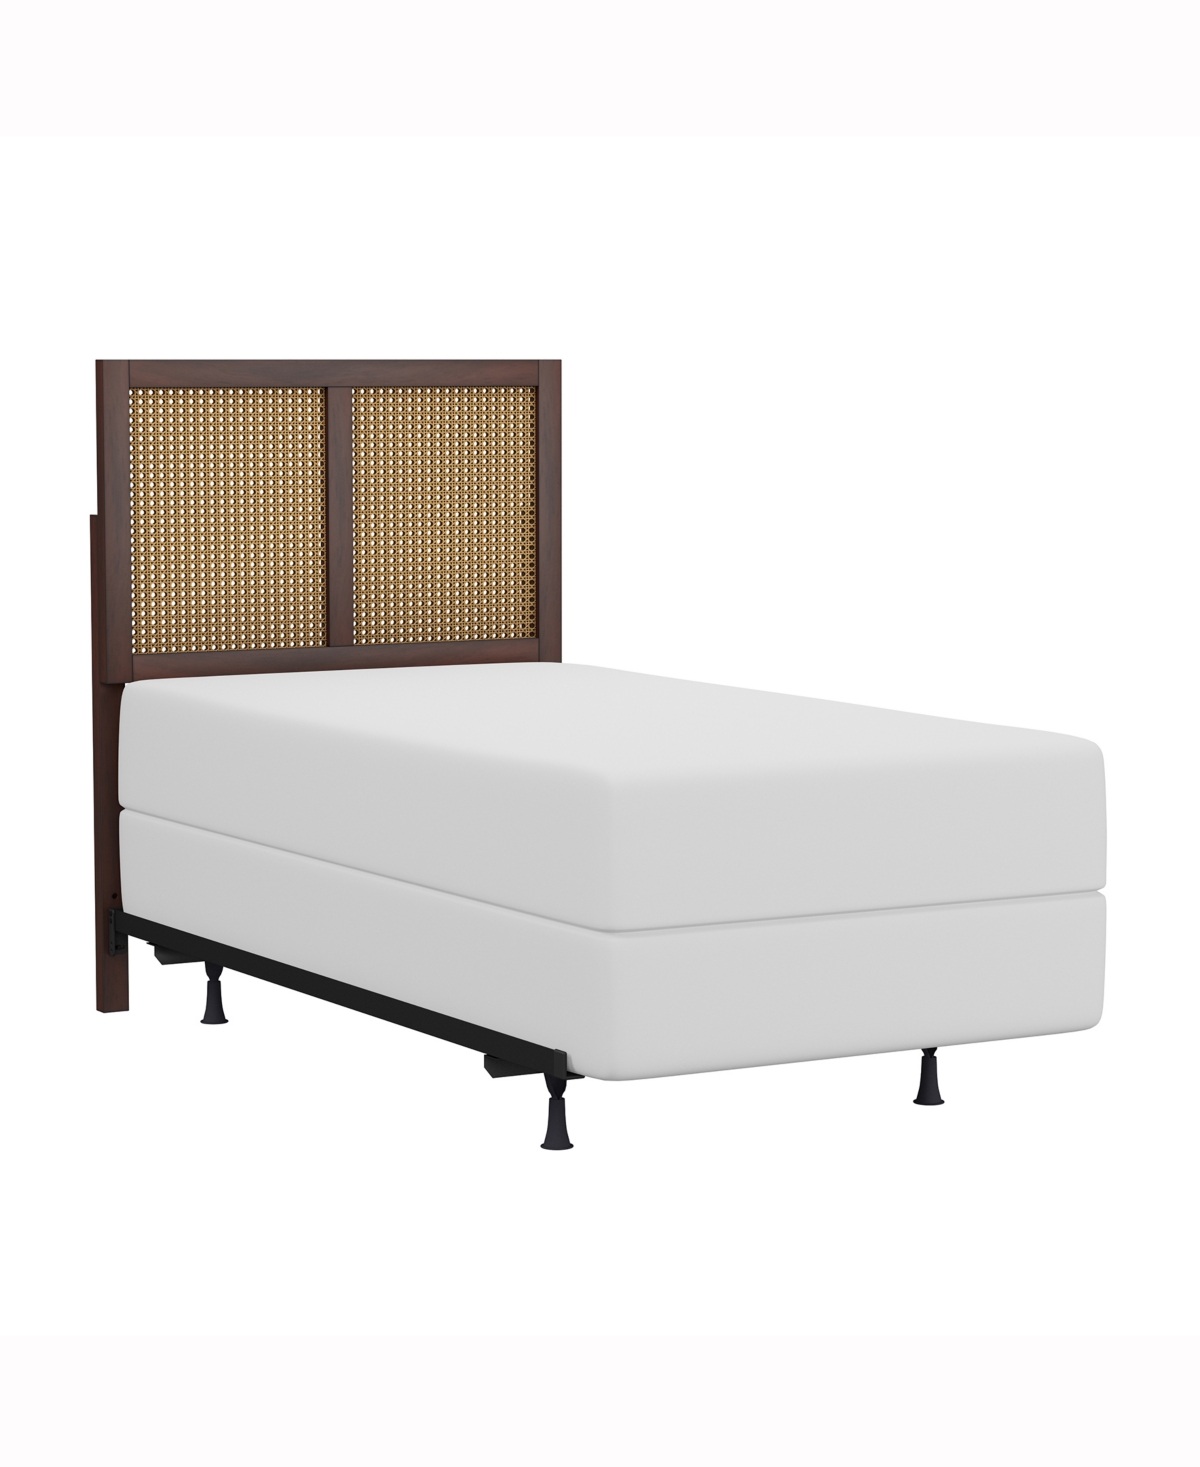 Hillsdale 50" Wood And Cane Panel Serena Furniture Twin Headboard With Frame In Chocolate